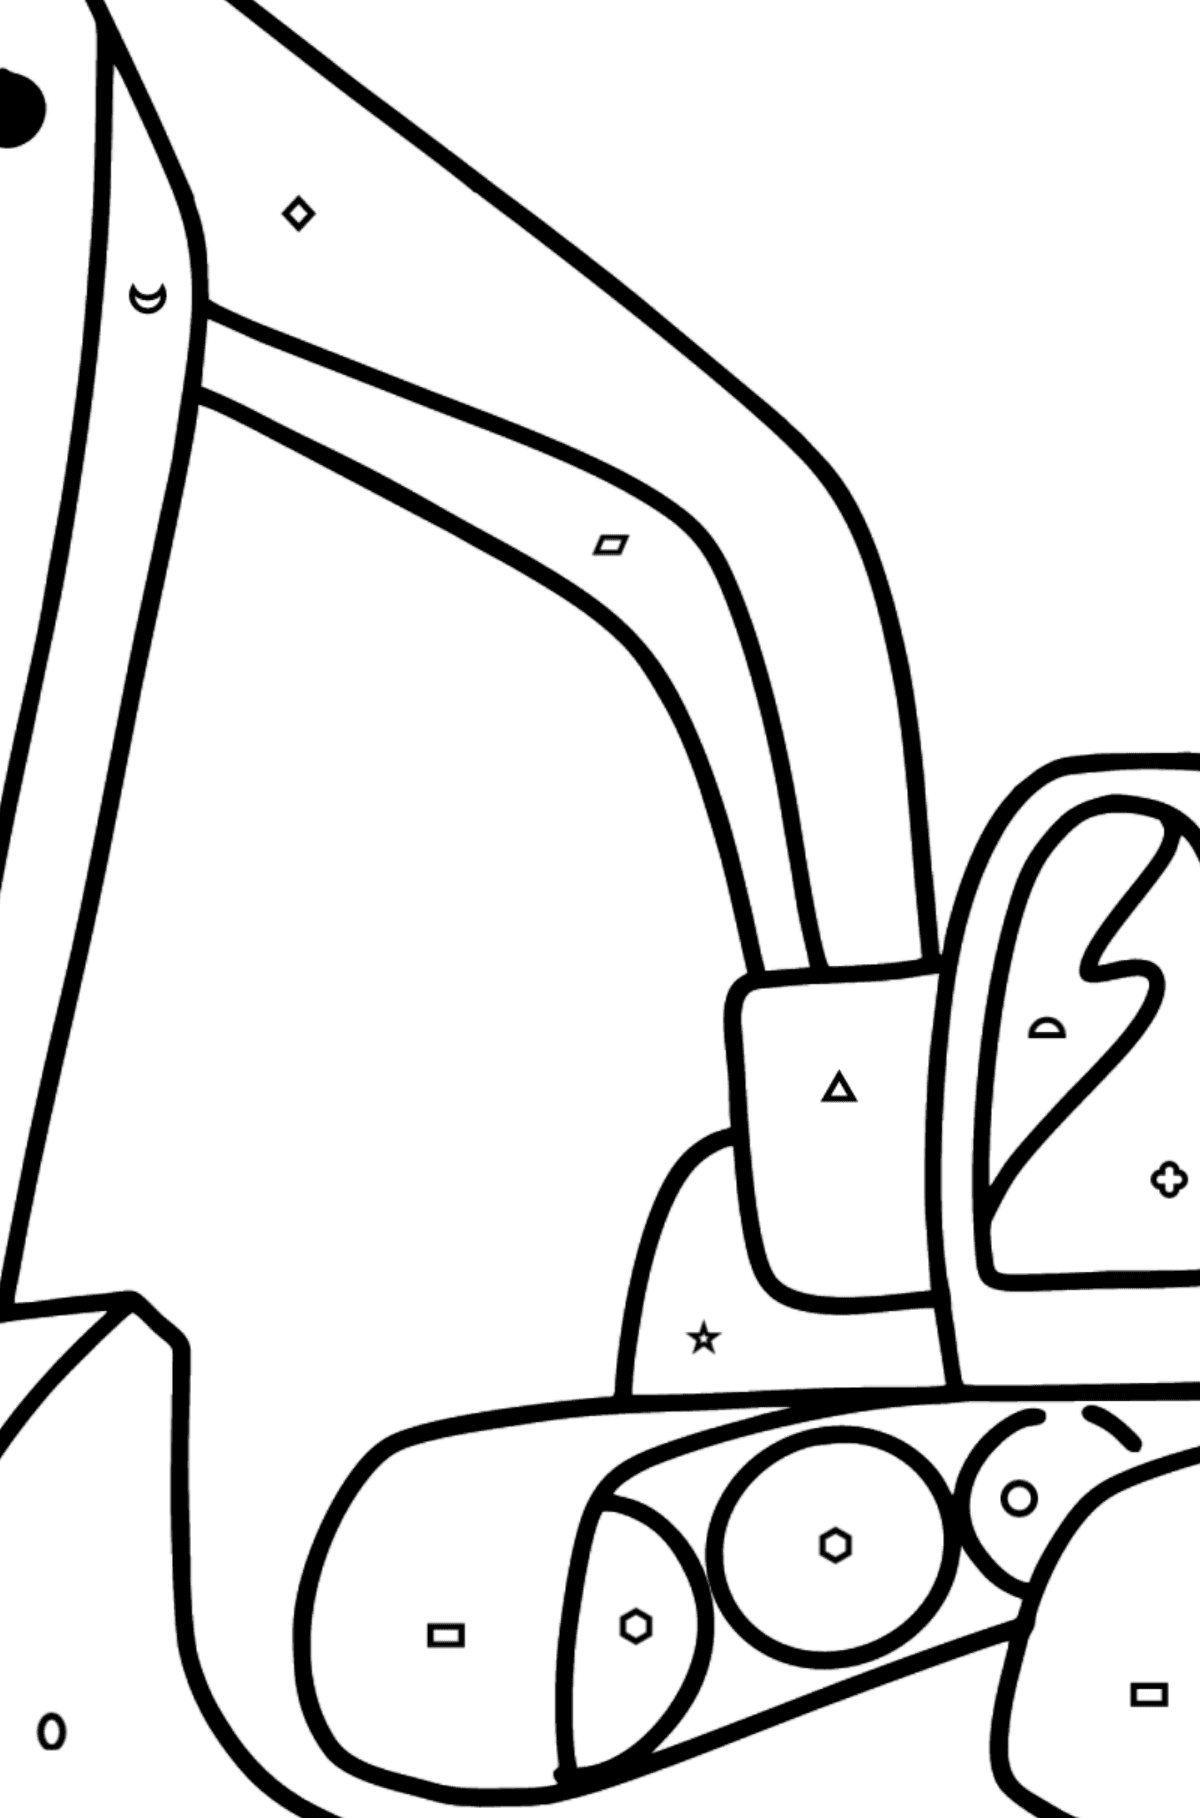 Tractor Excavator coloring page - Coloring by Geometric Shapes for Kids